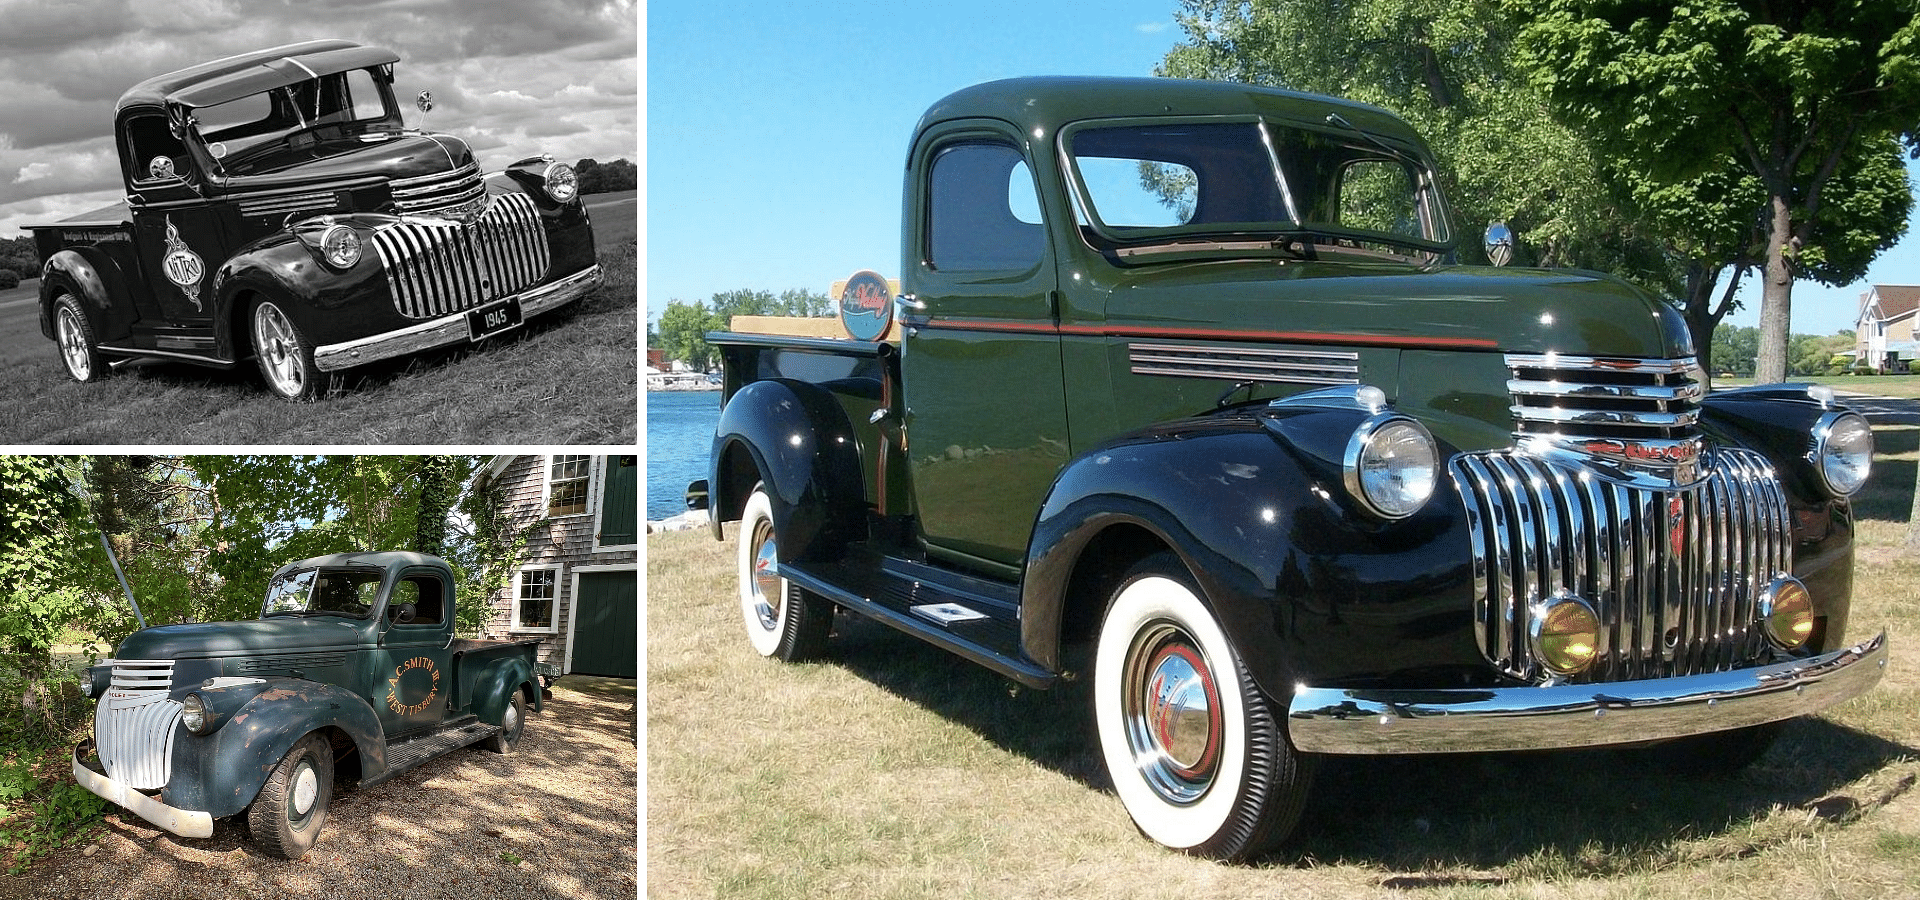 1945 Chevy Pickup Truck in Green Exterior color, front view